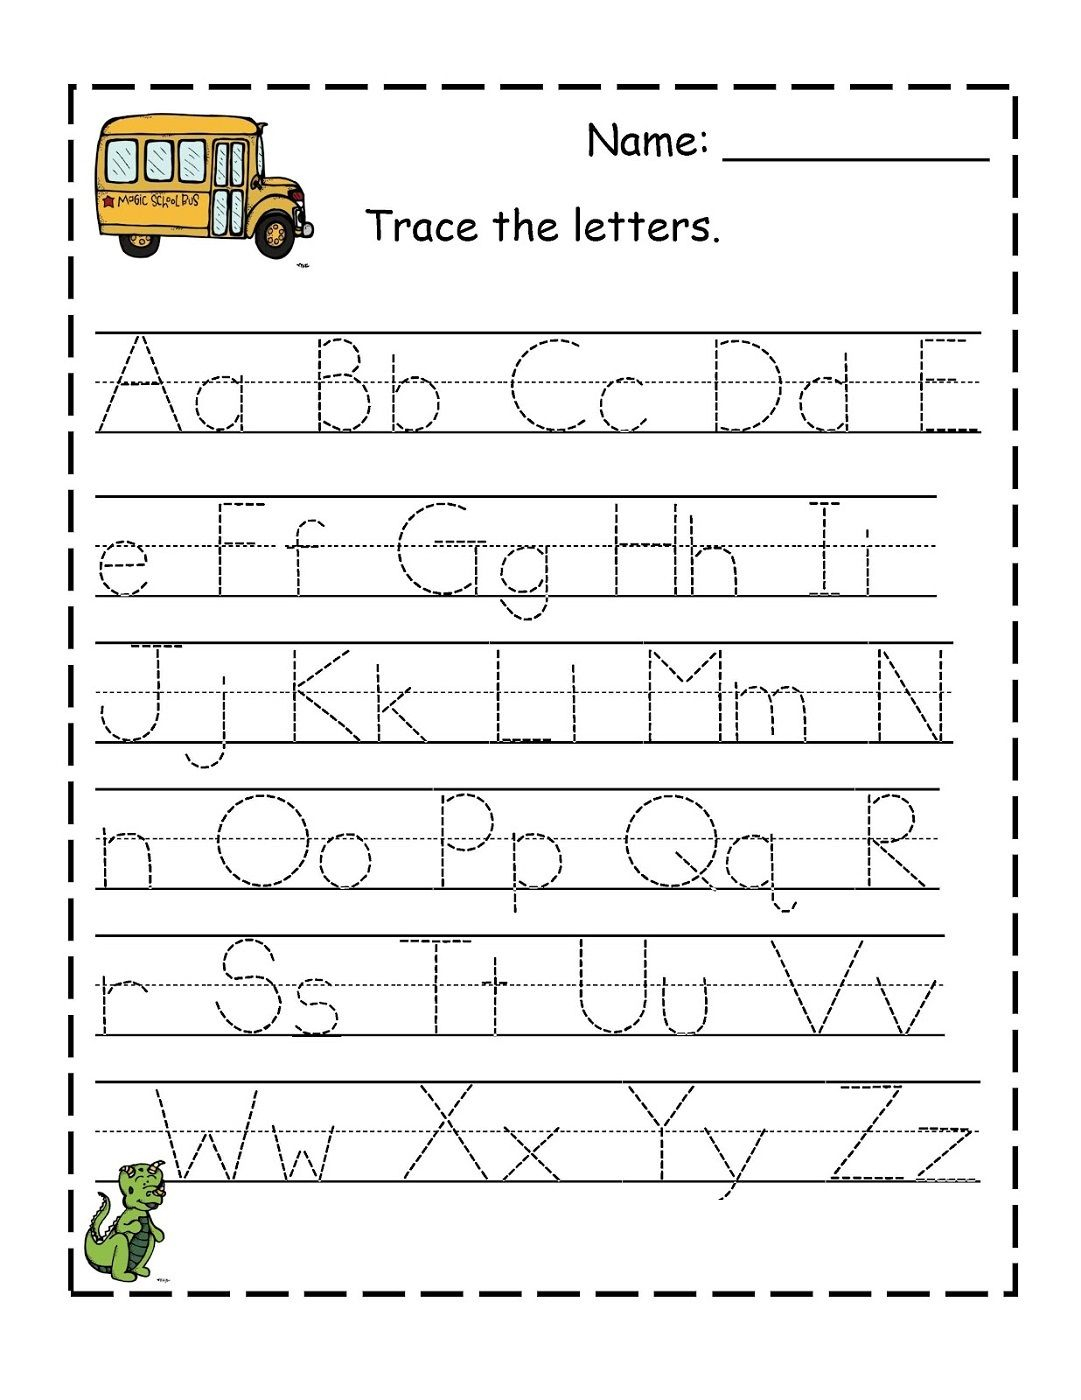 Free Preschool Tracing Alphabet Printables | Educative in Tracing Letters Printables Free